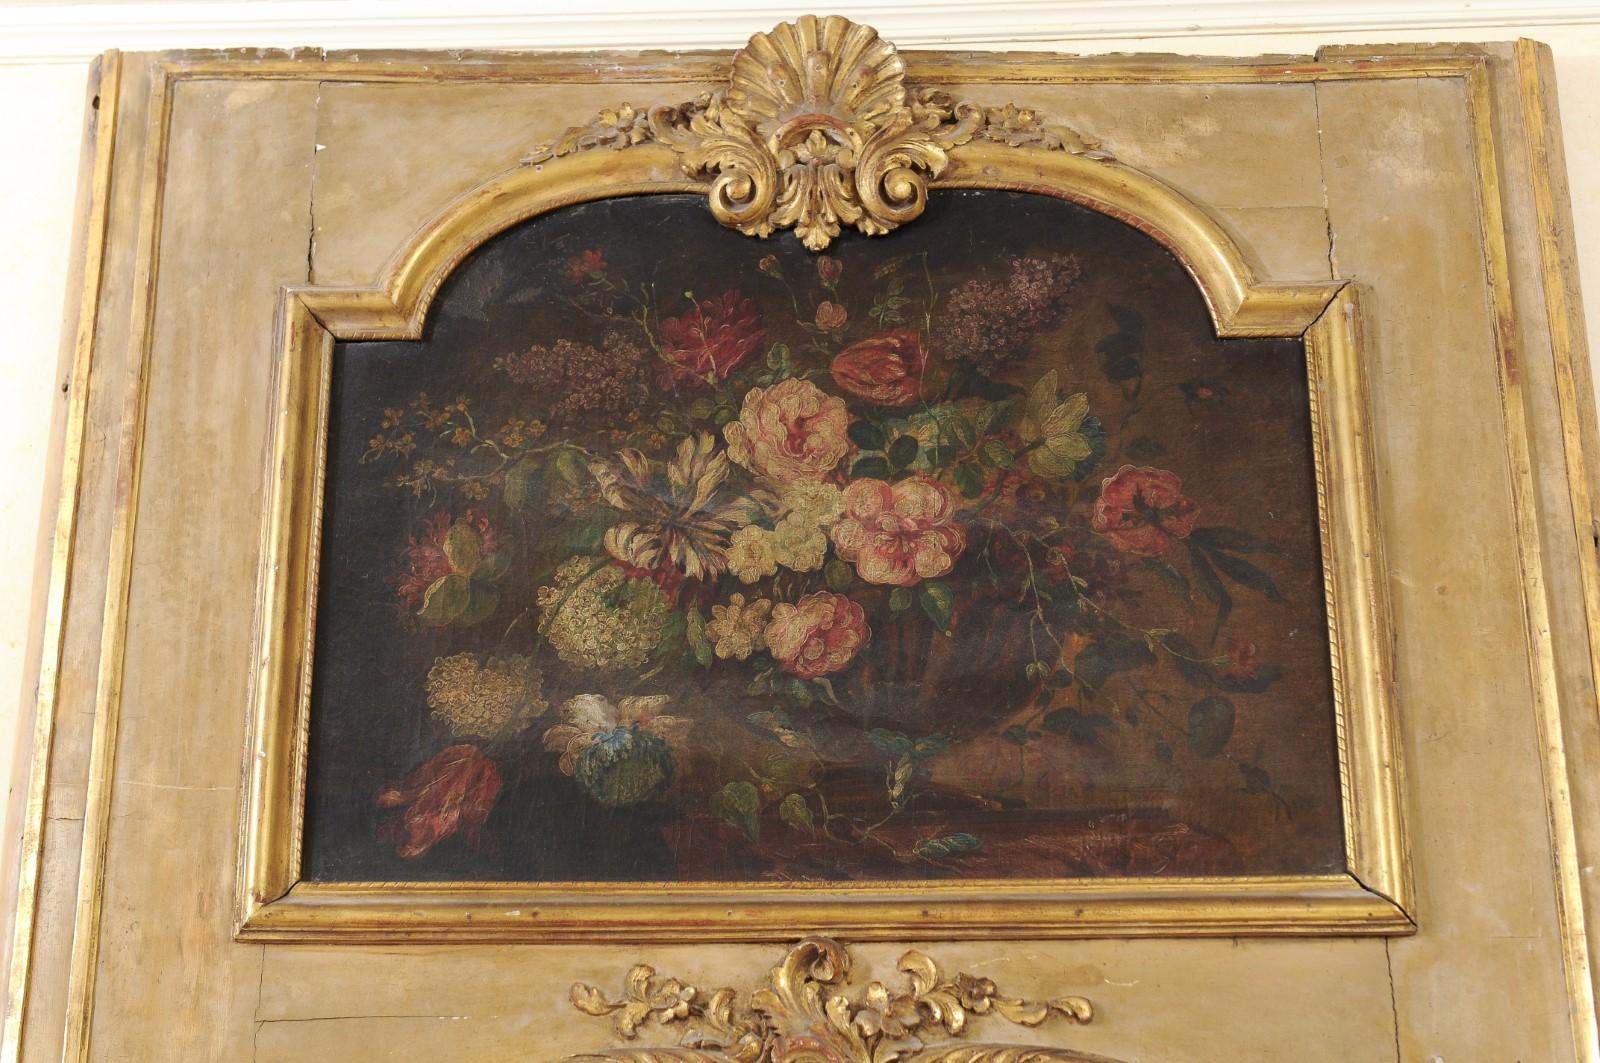 French 1790s Painted Trumeau Mirror with Original Oil on Canvas Floral Painting For Sale 2